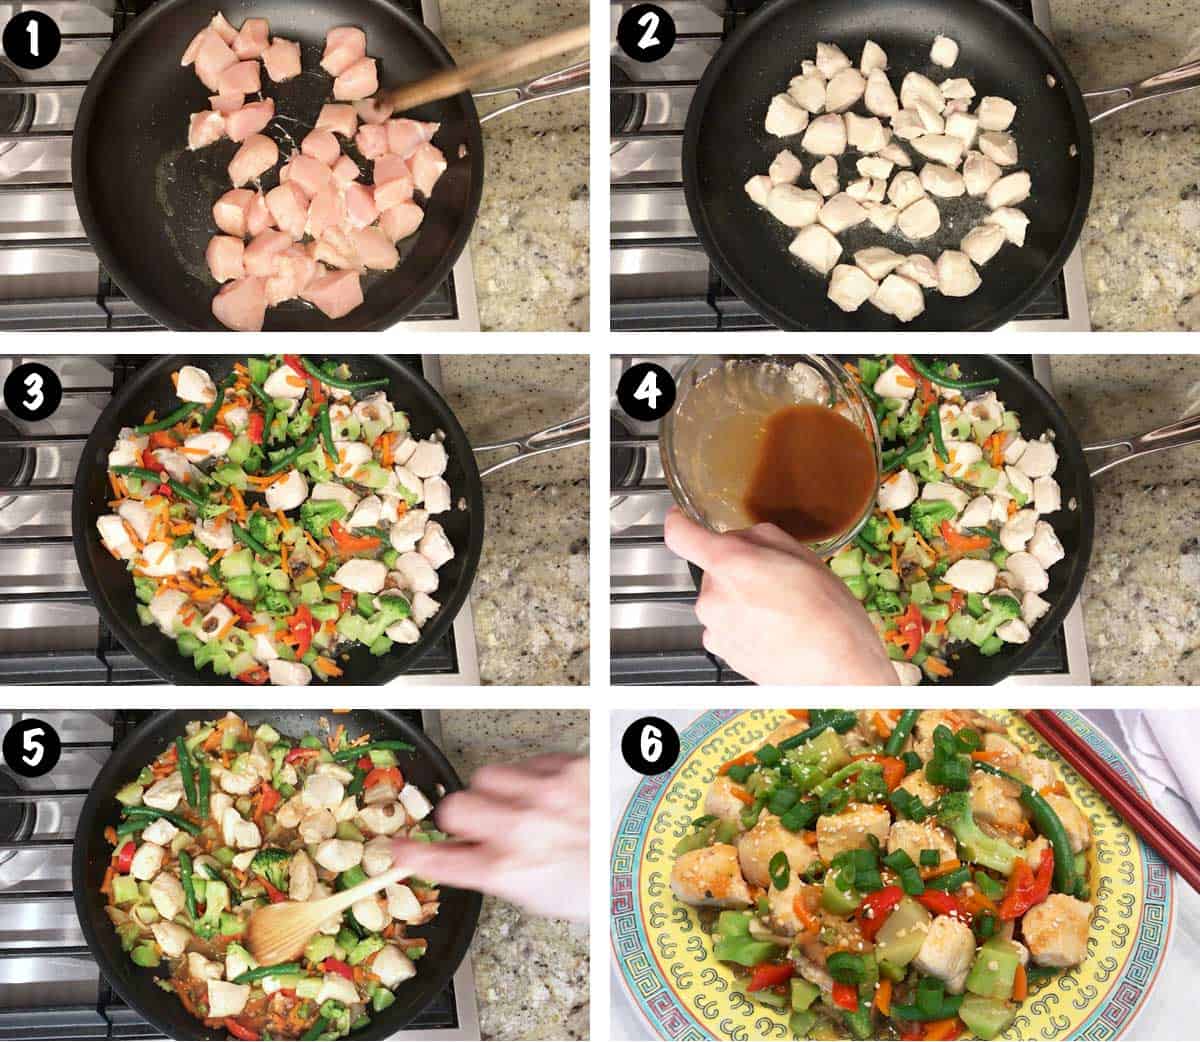 A six-photo collage showing the steps for making a chicken vegetable stir-fry.